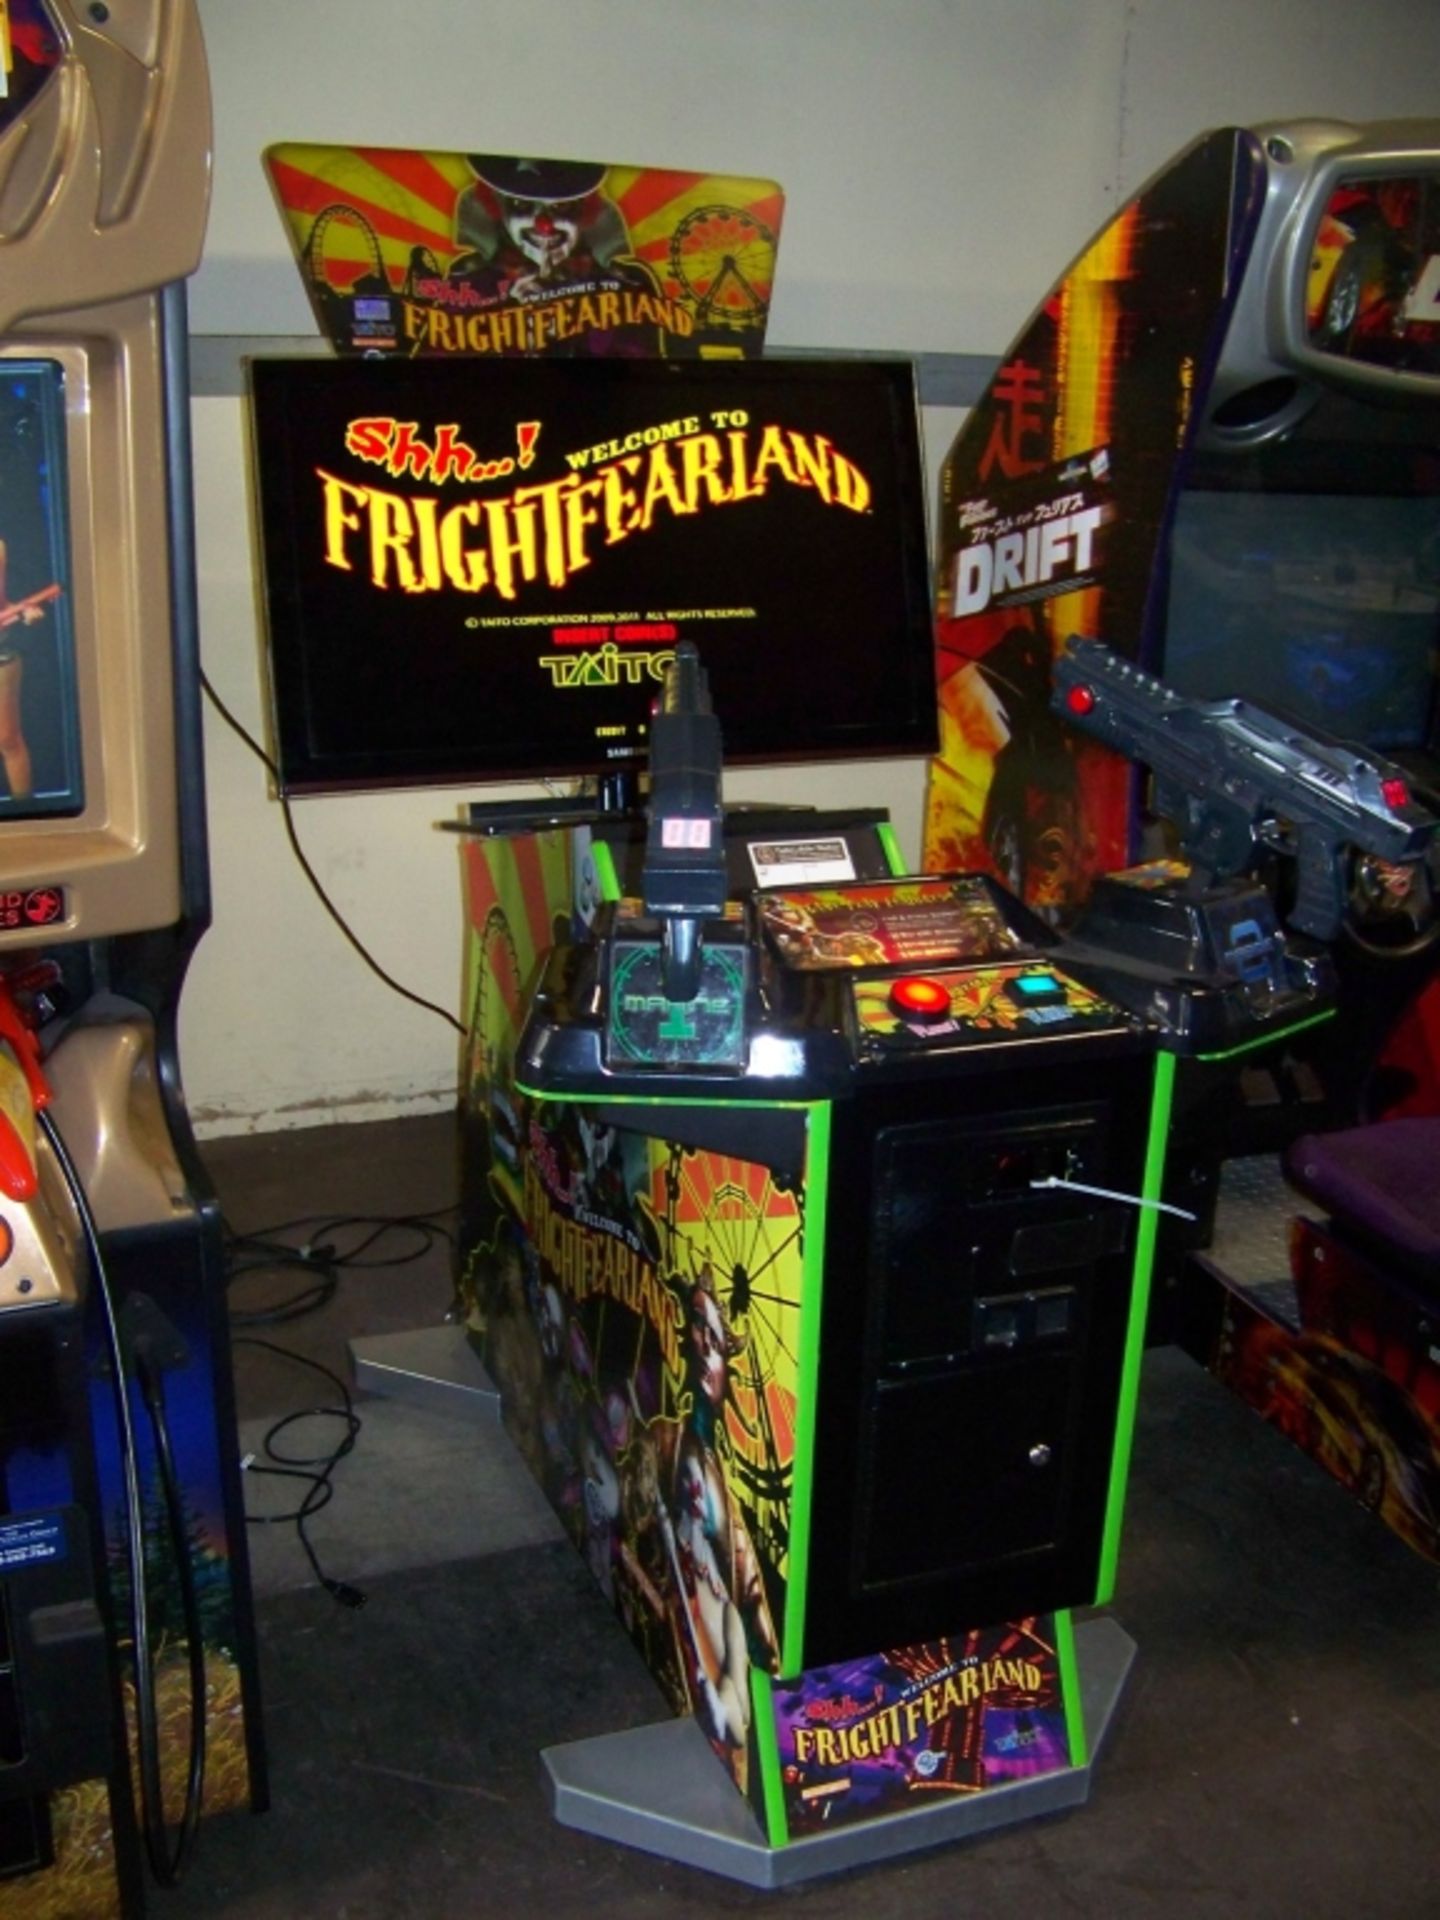 FRIGHT FEARLAND FIXED GUN SHOOTER ARCADE GAME - Image 2 of 6